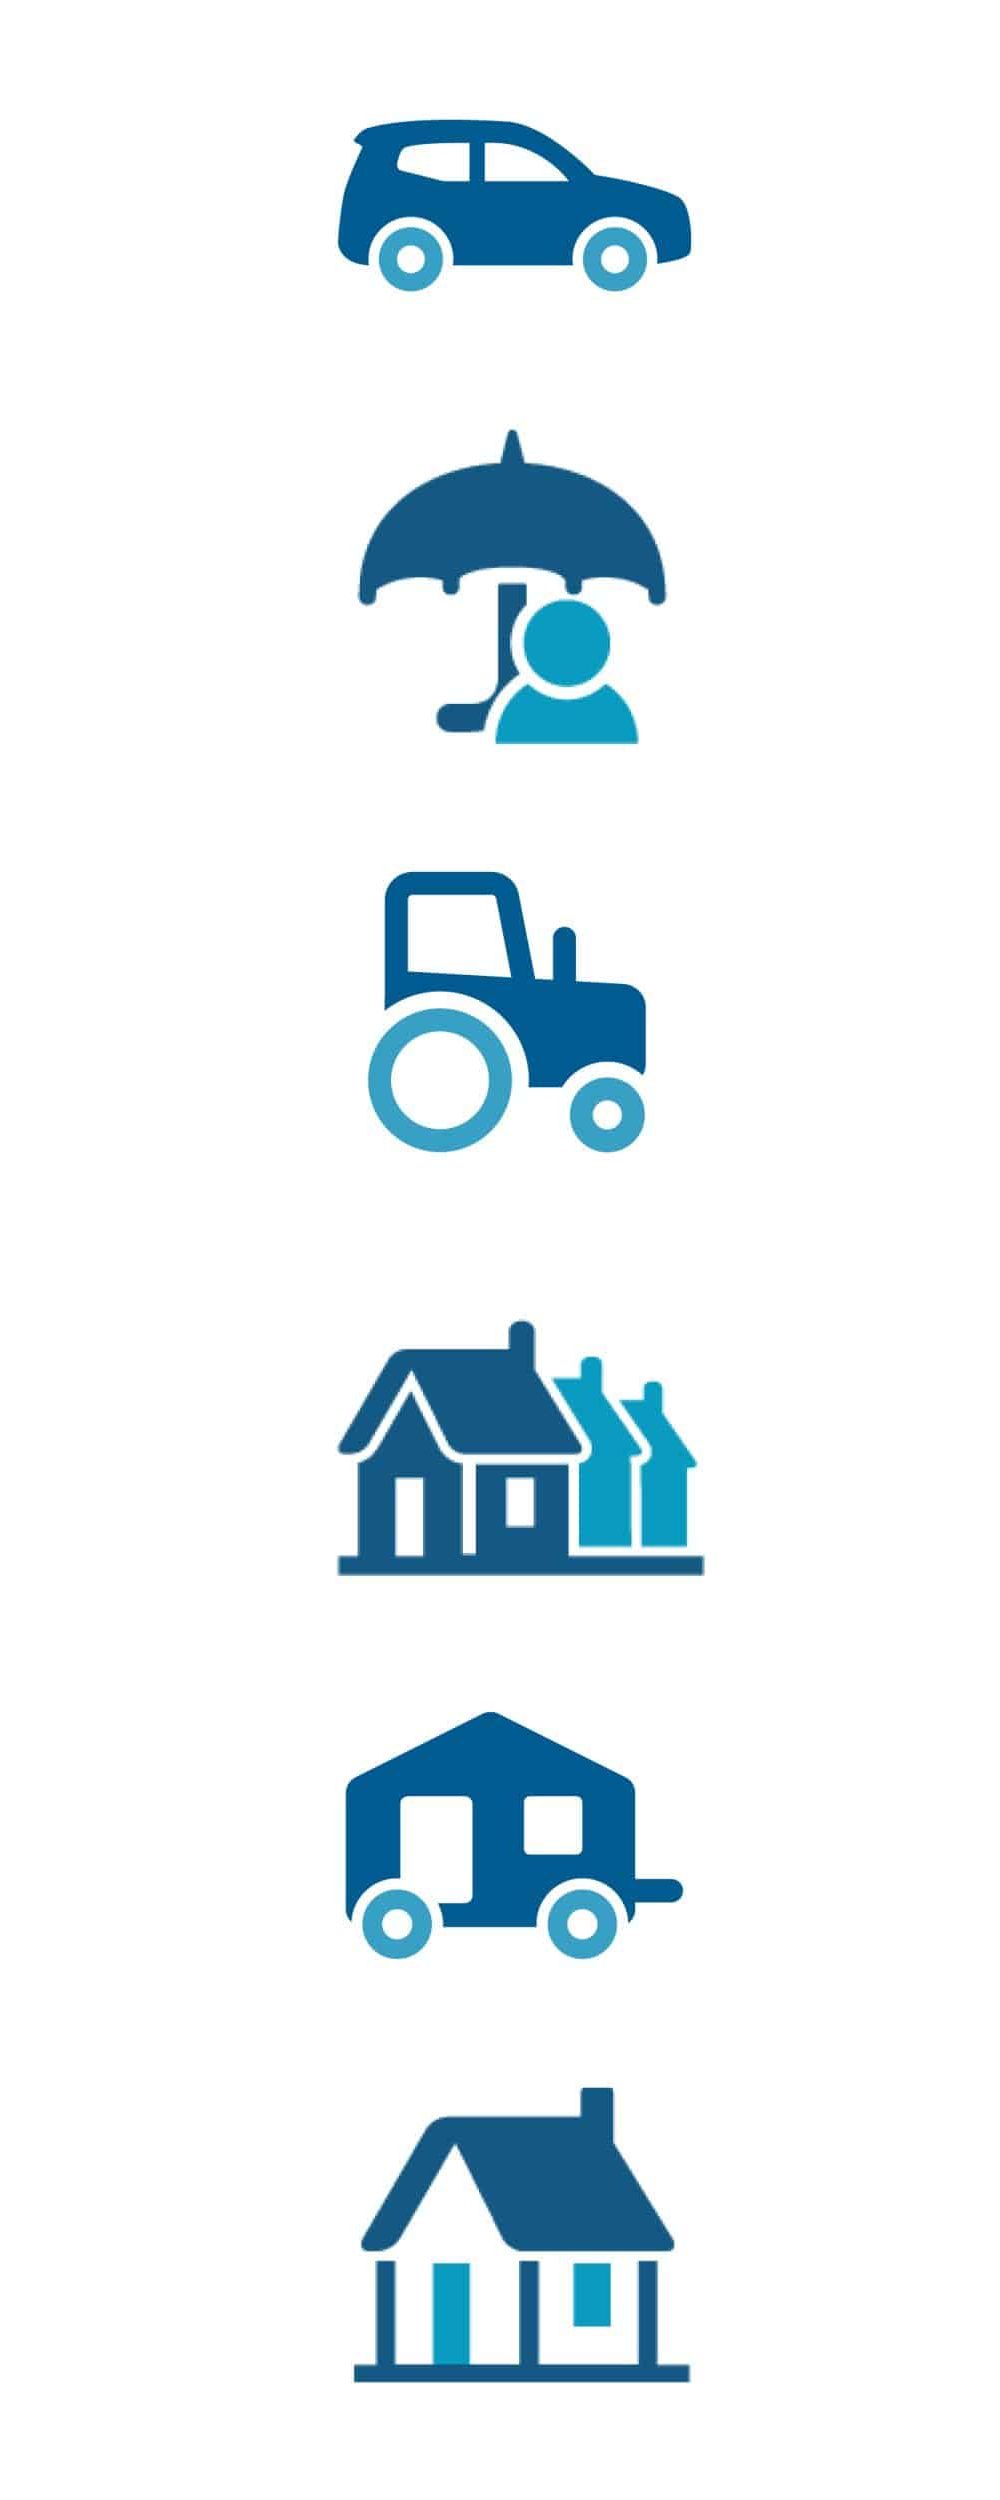 Product icons. Auto, umbrella, farm, rental property, mobile home, homeowners.